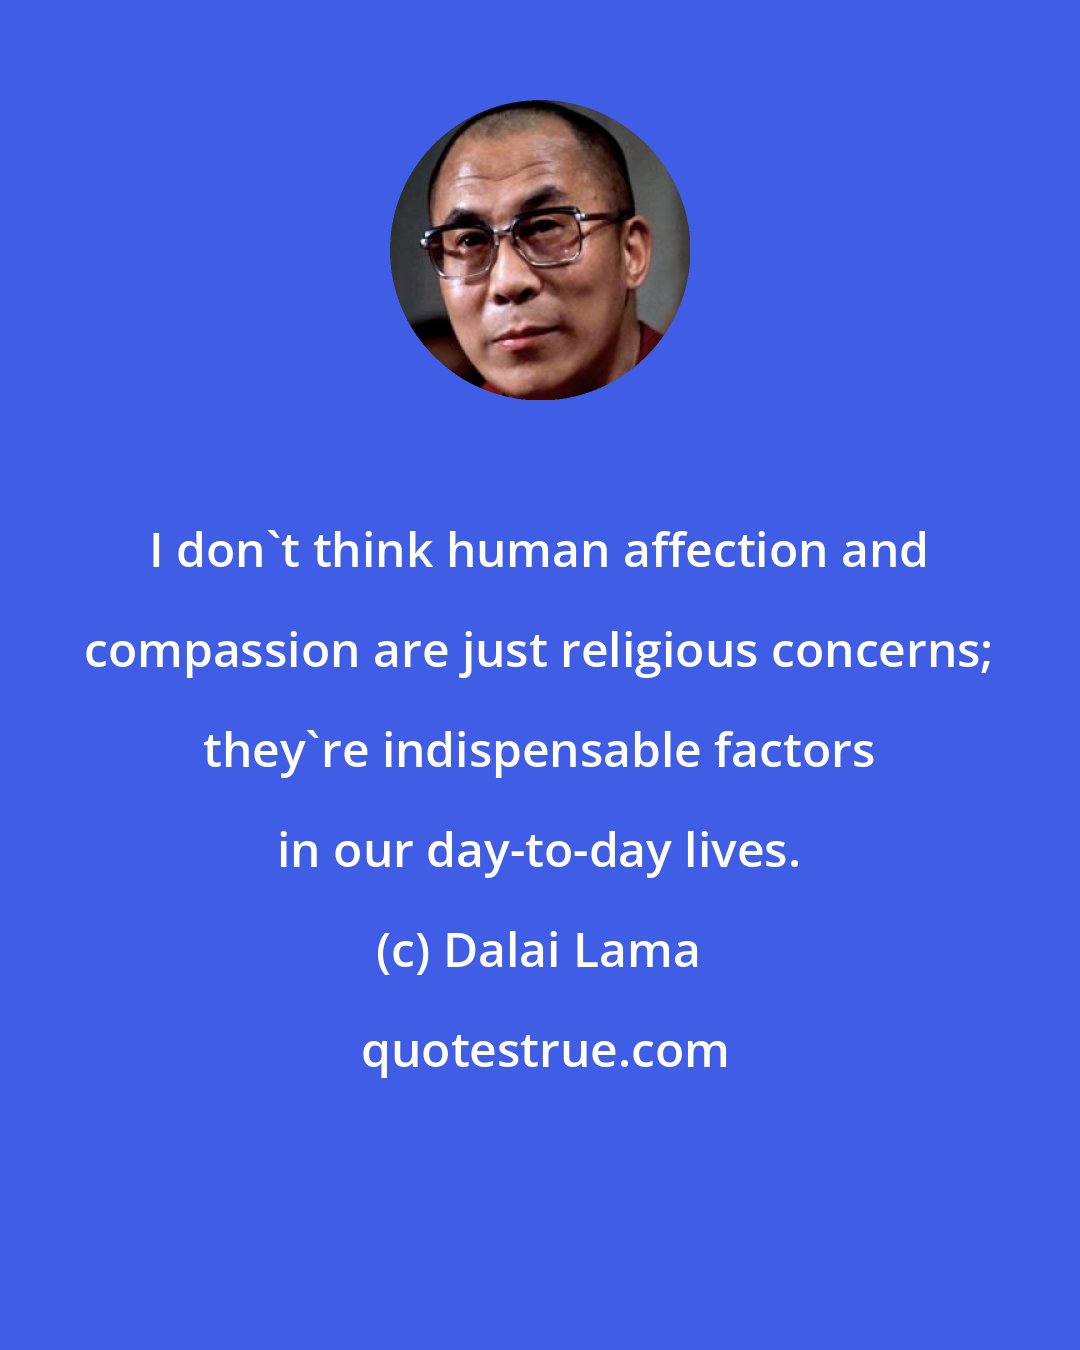 Dalai Lama: I don't think human affection and compassion are just religious concerns; they're indispensable factors in our day-to-day lives.